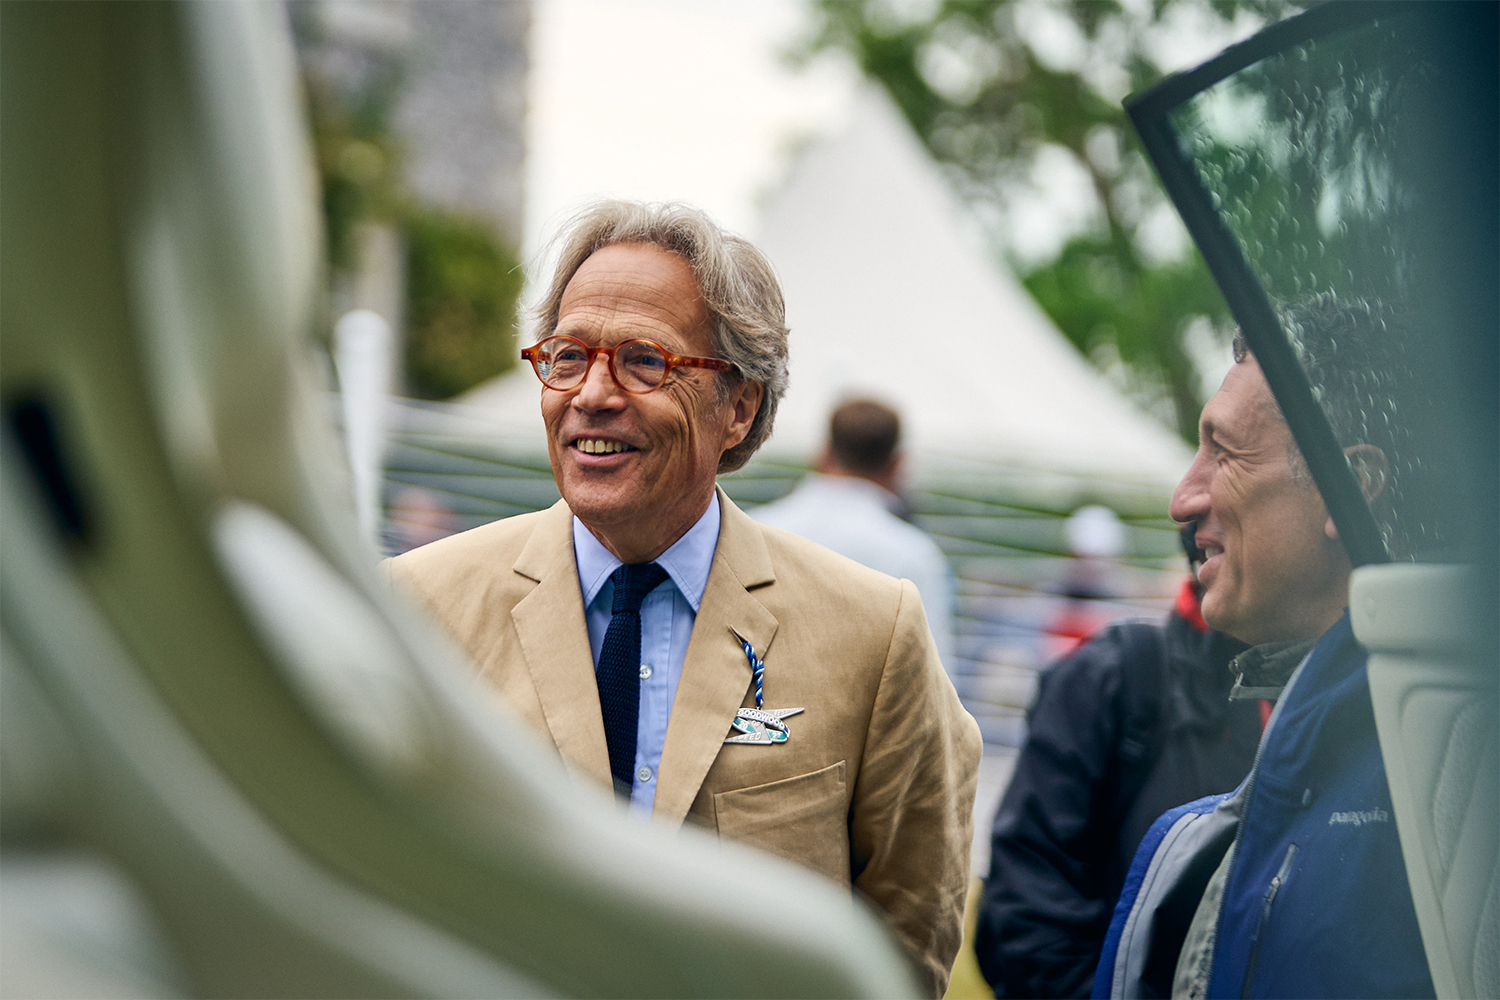 Charles Gordon-Lennox, the 11th Duke of Richmond, seen here in a tan suit at the 2022 edition of the Goodwood Festival of Speed